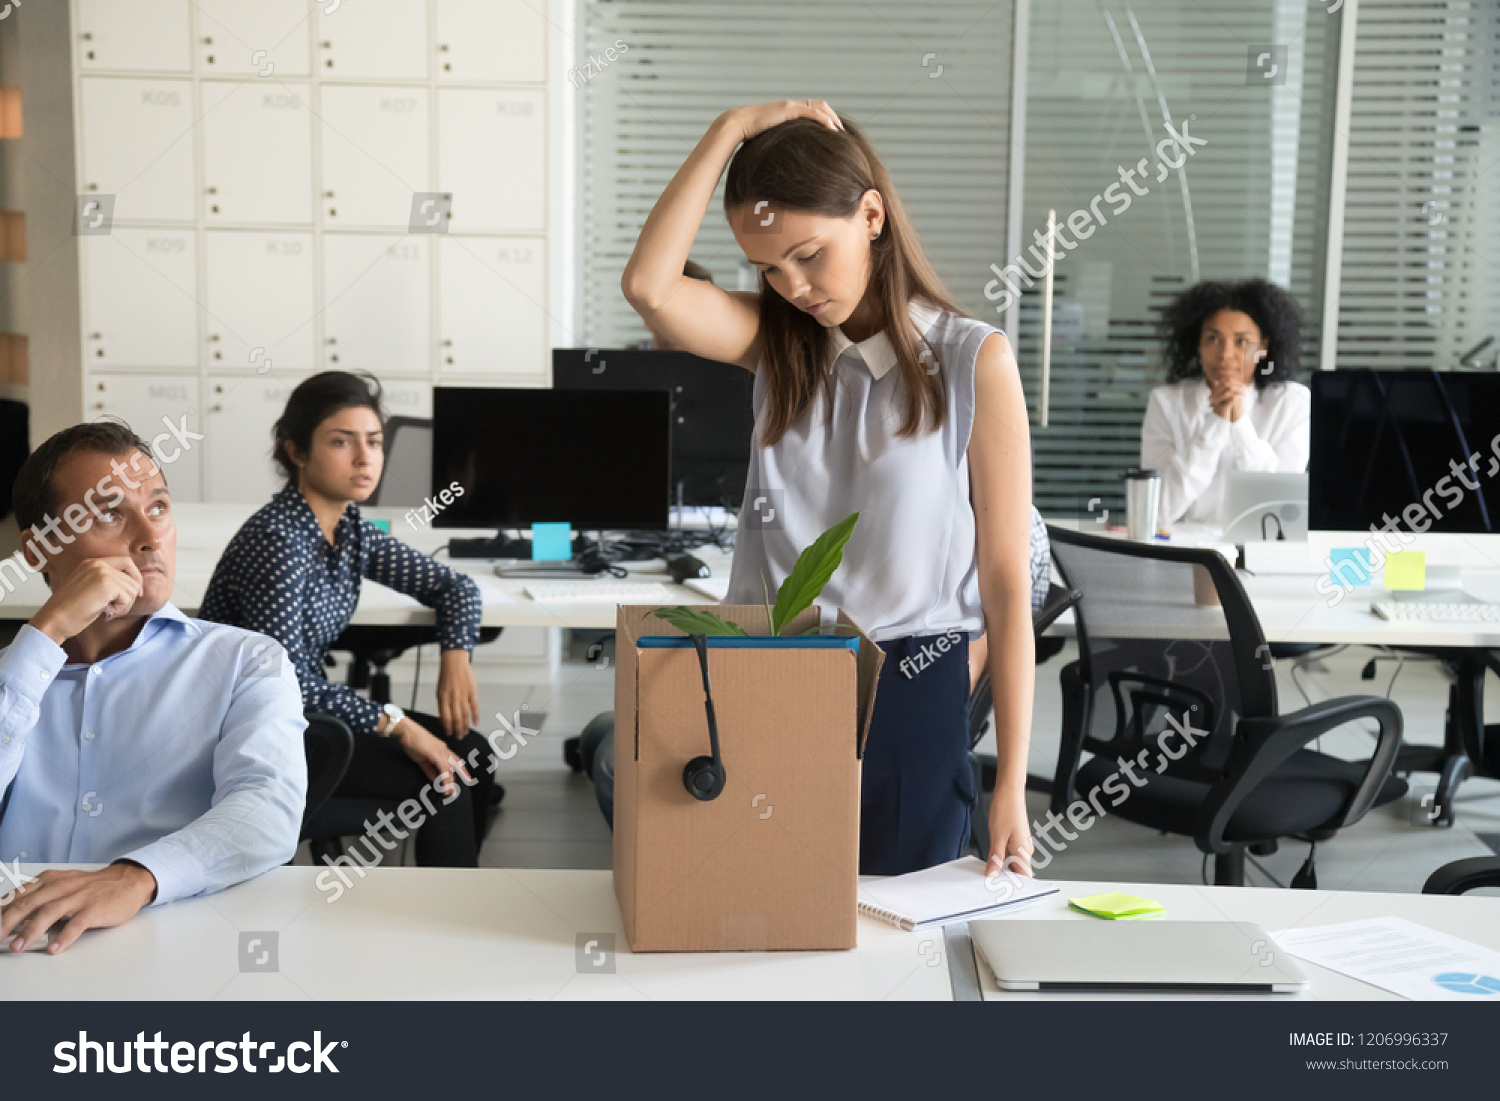 Upset female employee packing belongings in box, frustrated stressed girl getting fired from job ready to leave on last day at work, sad office worker desperate about unfair dismissal losing job #1206996337